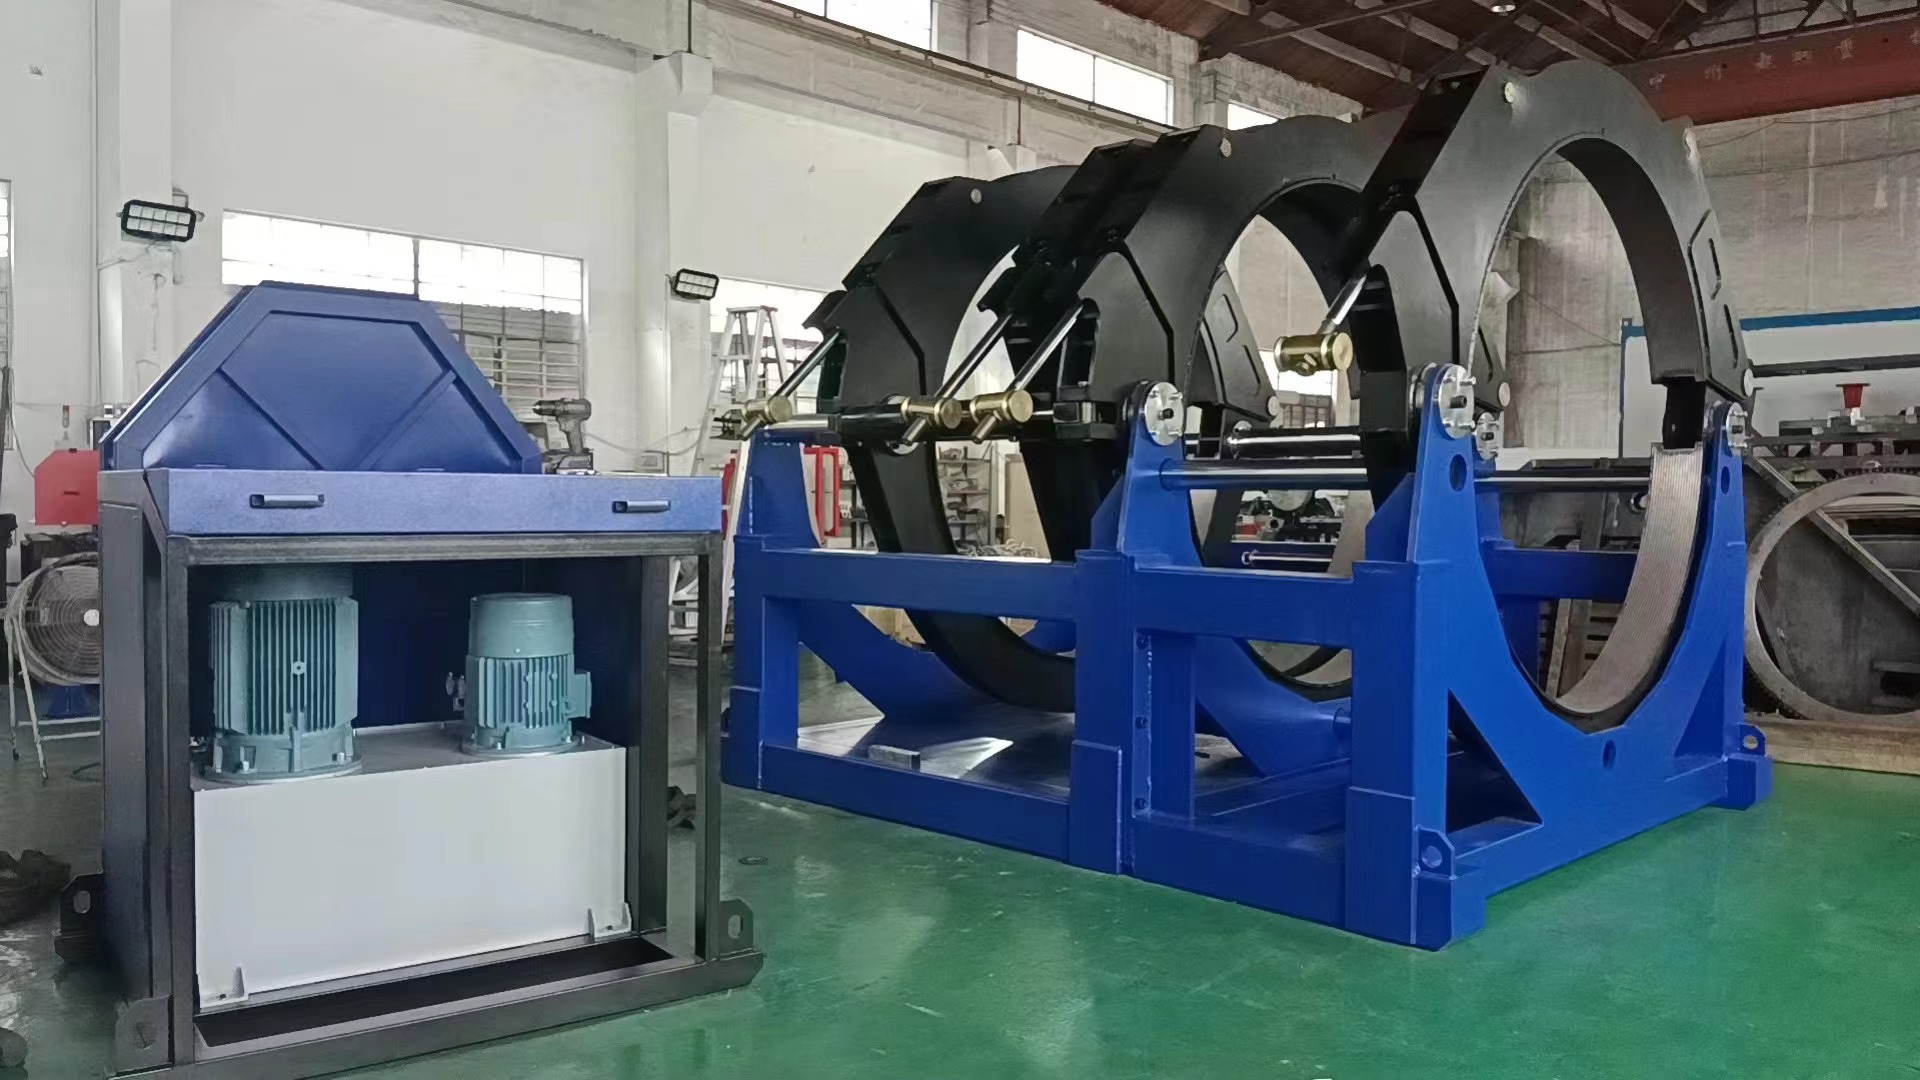 The 3000mm machine has a lot of praise, and the order for the 2000mm machine is also coming.